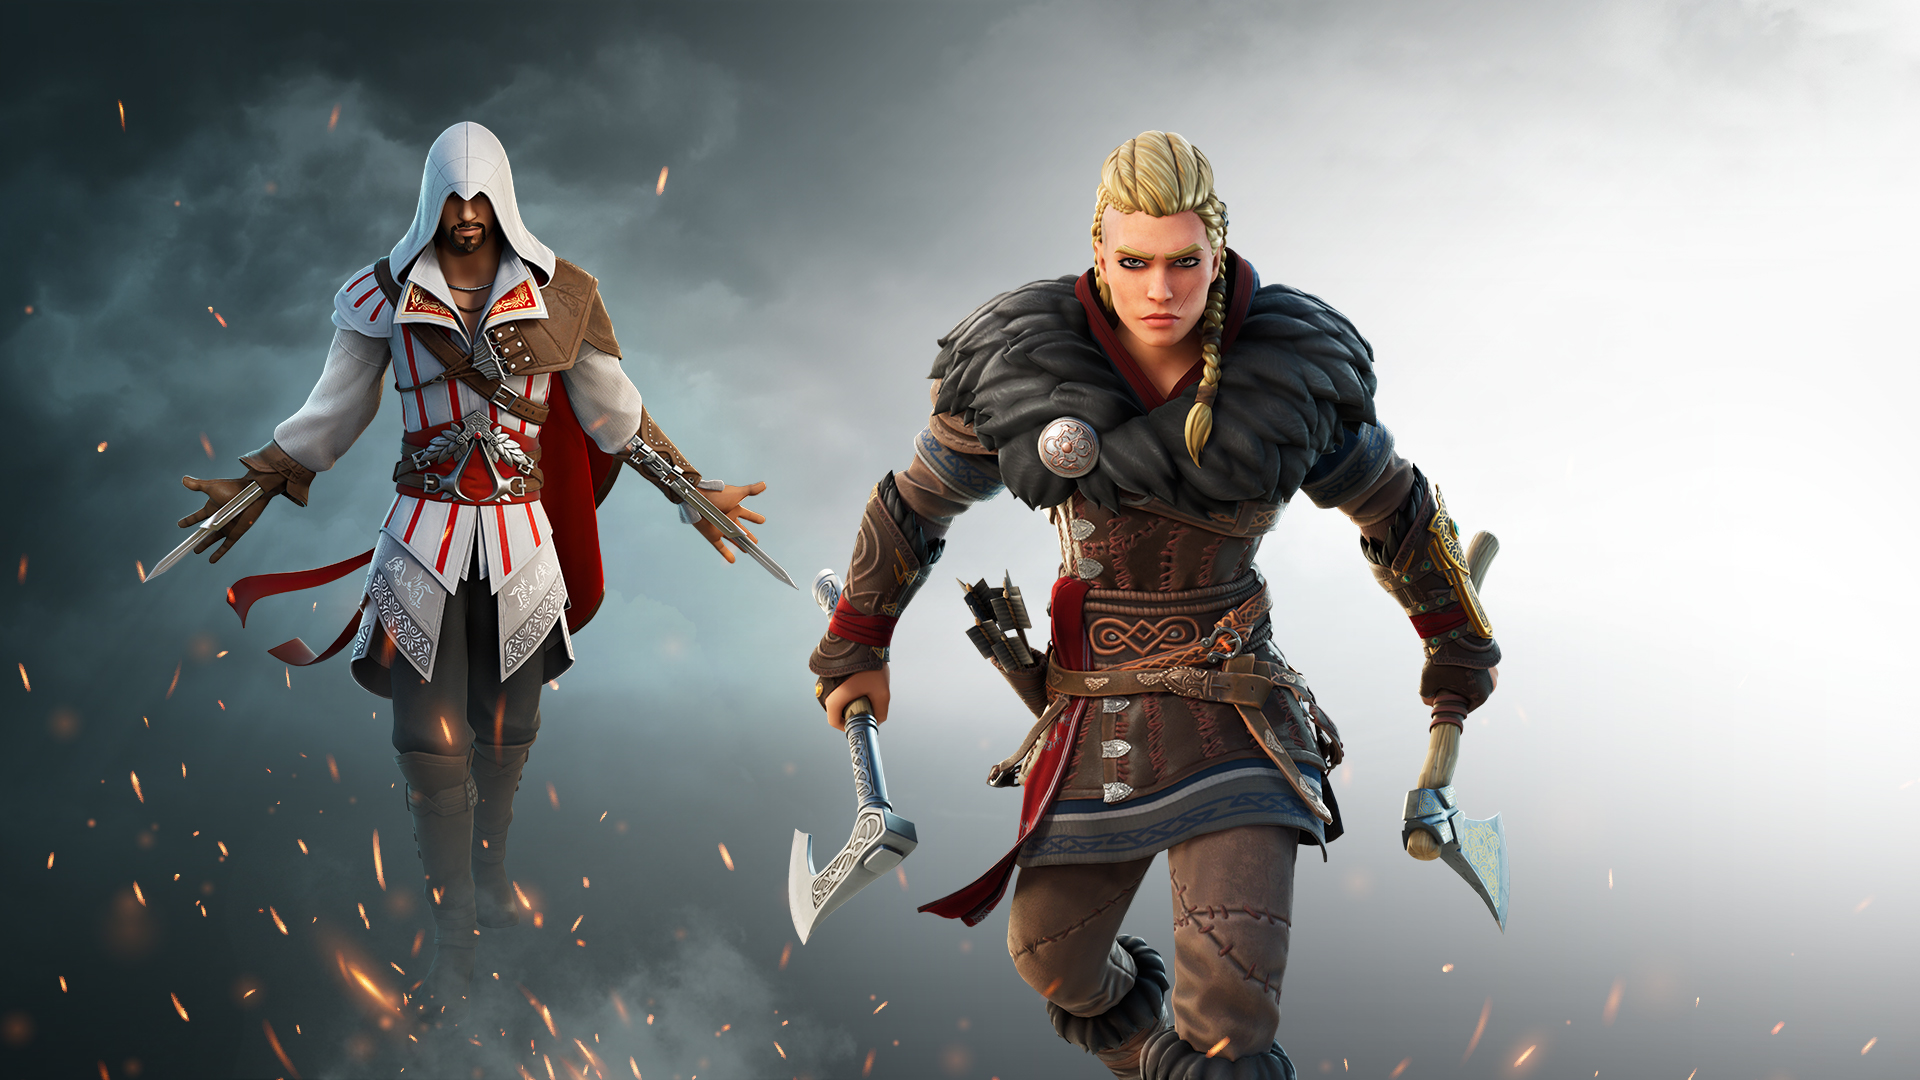 Leak: Assassin's Creed, Uncharted, Patrick Mahomes and more to return soon